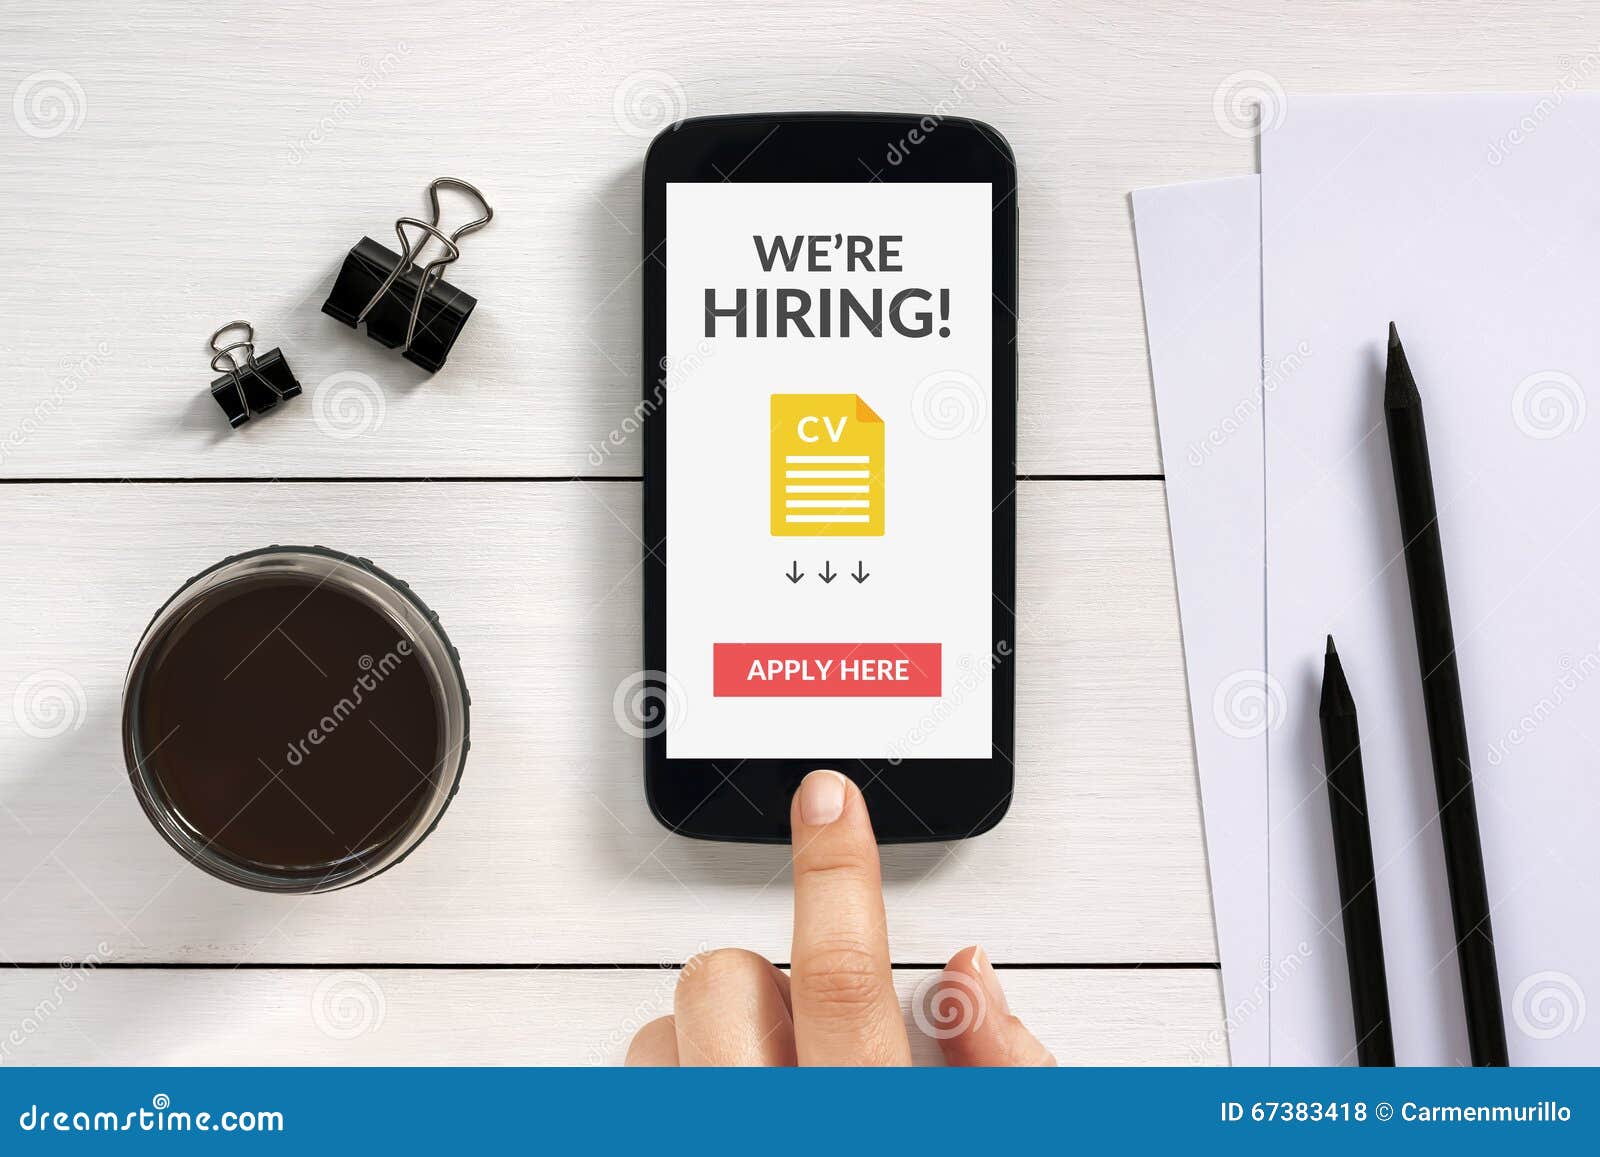 we are hiring apply now concept on smartphone screen with office